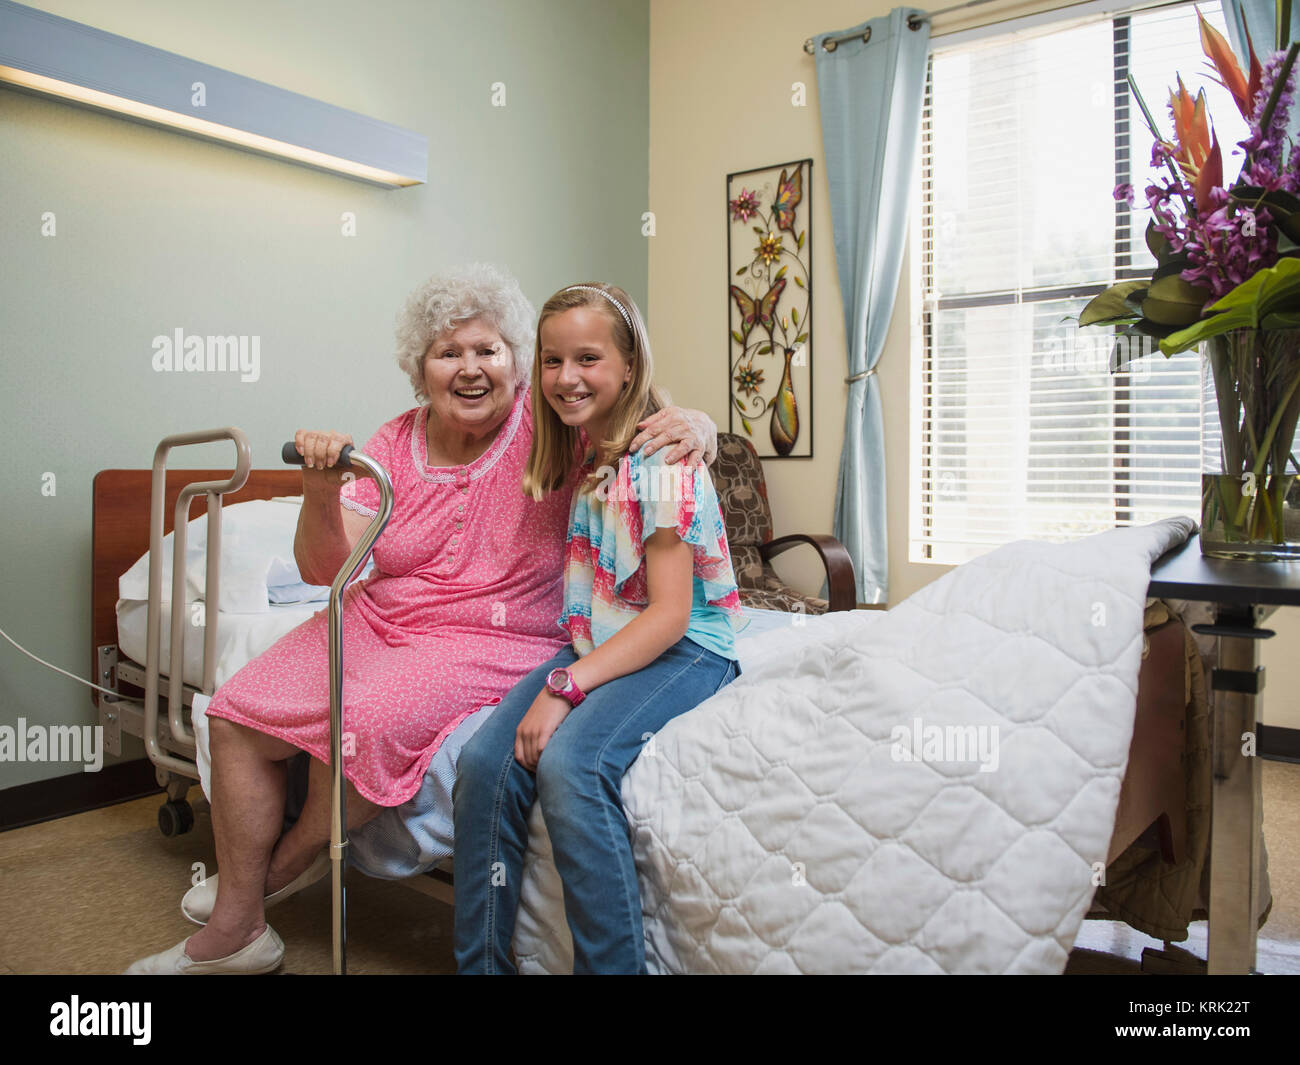 Smiling Caucasian woman sitting on bed with granddaughter Stock Photo